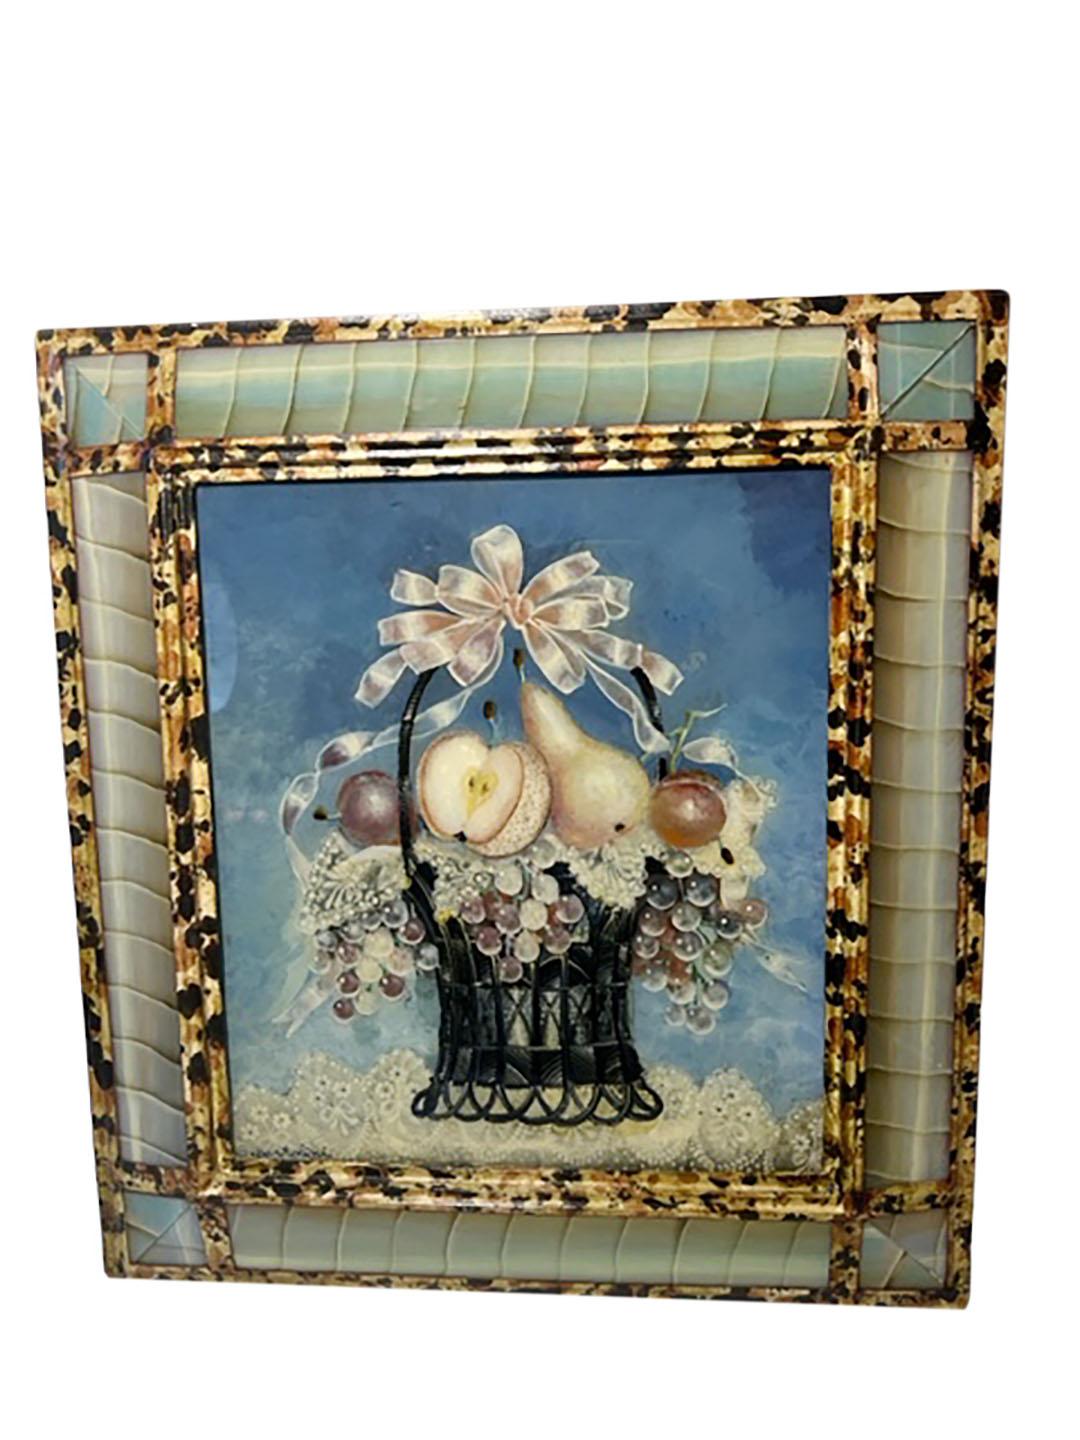 Suzy Bartolini reverse painting, French artist born 1930. Well known for her reverse painting of flowers baskets and individuals. Very special custom frames made by her. Circa 1950. Image itself is thirteen by eleven and a half inches.